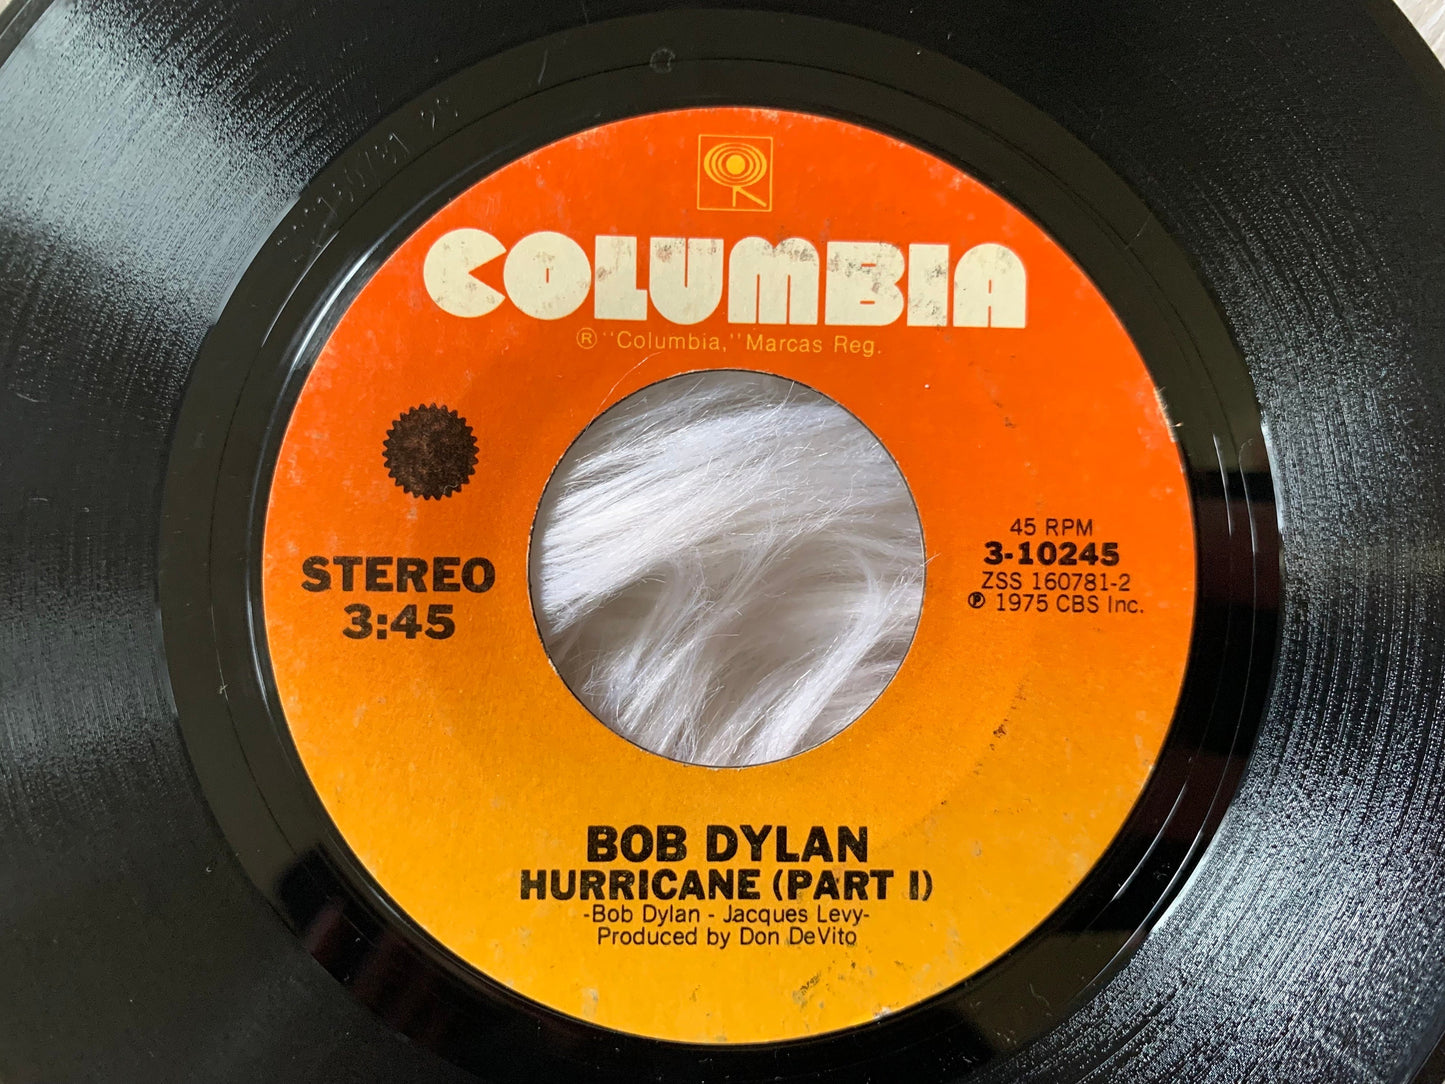 Bob Dylan Hurricane (Part I and II) 1975 Columbia 3-10245 Vintage Vinyl Records 70's Bob Dylan Singles 45 RPM 7" Records, Hurricane 1 and 2